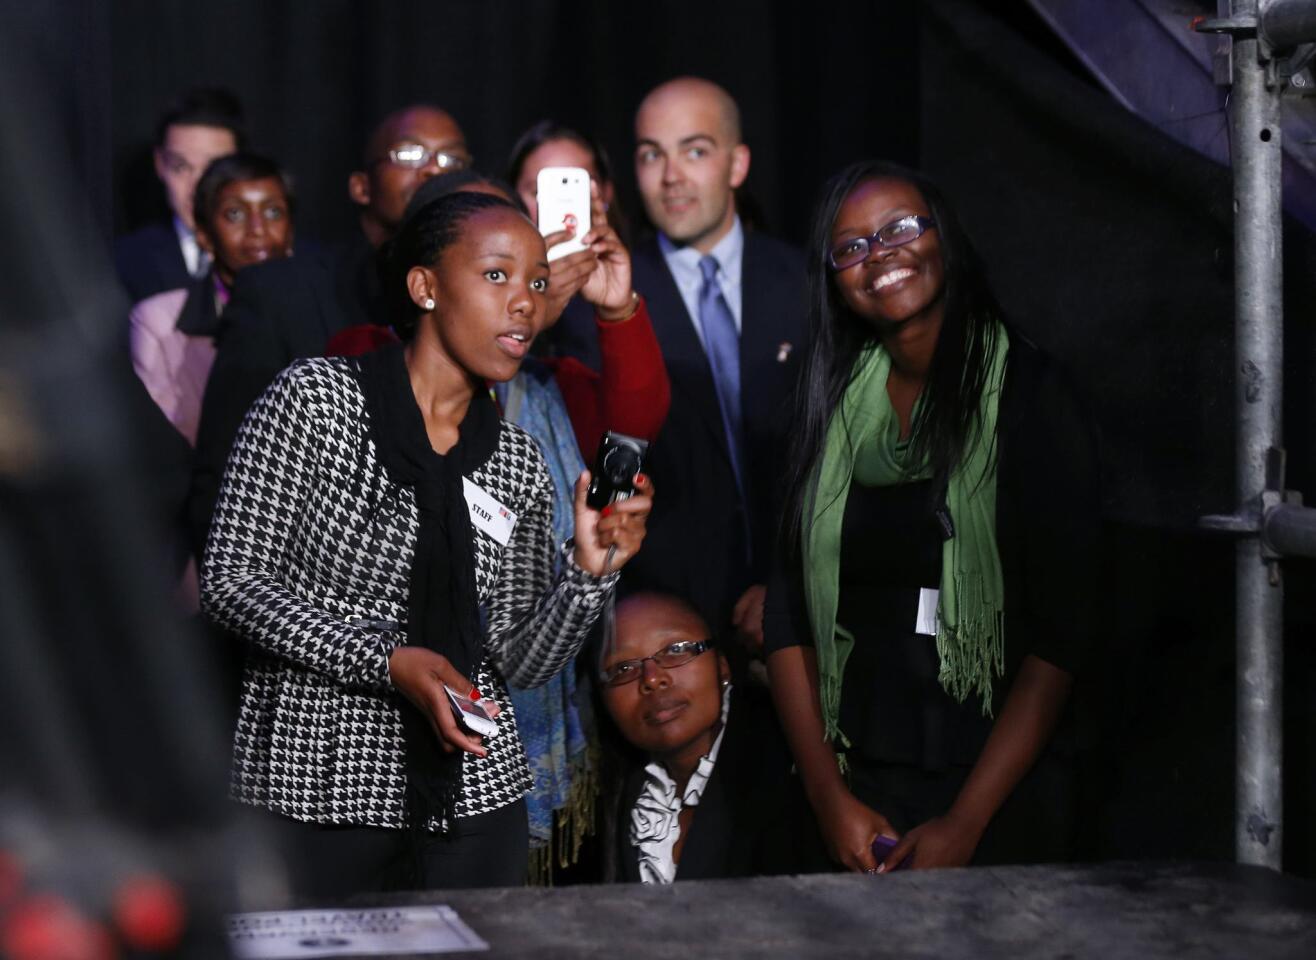 Members of the audience and press watch U.S. President Barack Obama from behind the bleachers as he participates in a town hall-style meeting with young African leaders at the University of Johannesburg in Soweto